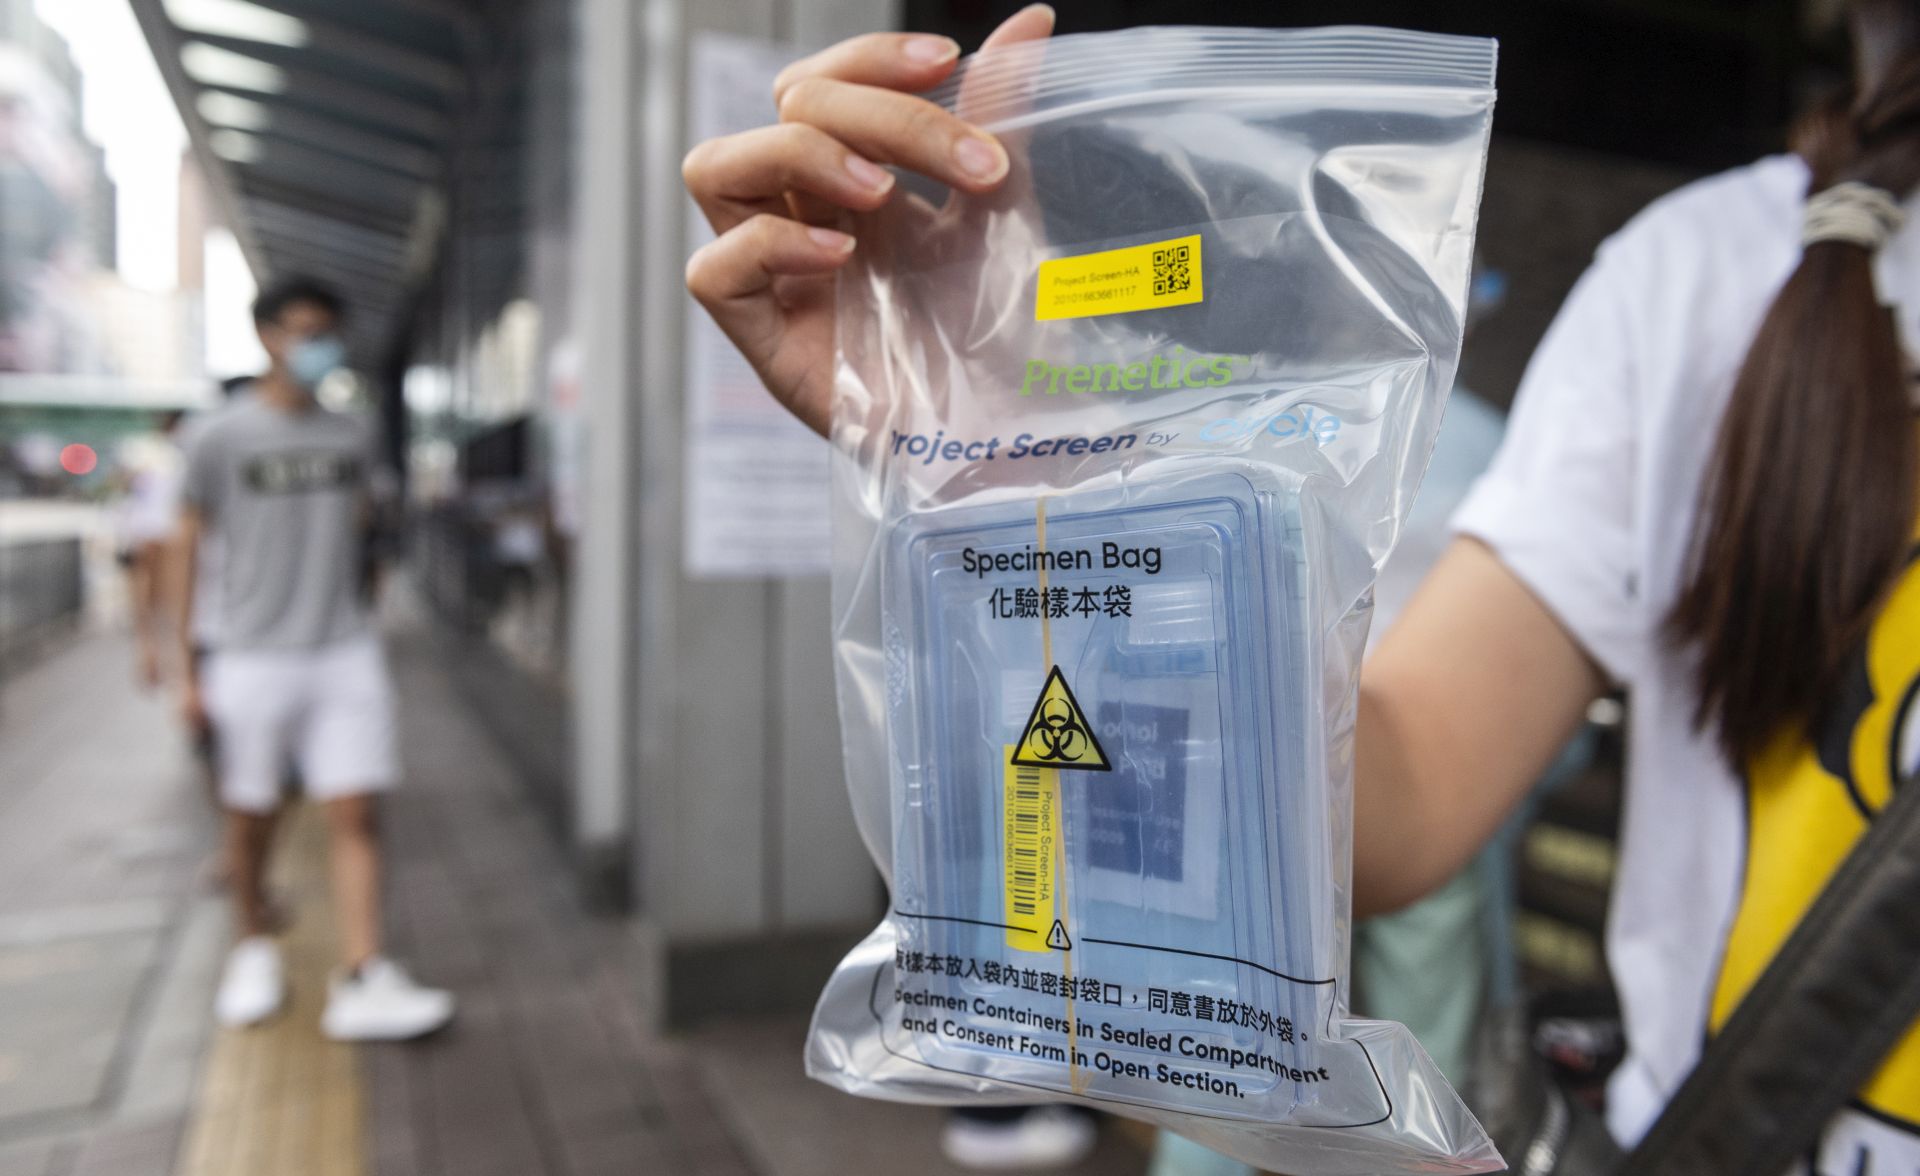 epa08613956 A resident shows a free COVID-19 test kit distributed by the government at the Cheung Sha Wan Government Offices building in Sham Shui Po, Hong Kong, China, 20 August 2020. Hong Kong is expected to launch a citywide voluntary COVID-19 testing program on 01 September 2020 to combat a new wave of coronavirus infection.  EPA/MIGUEL CANDELA